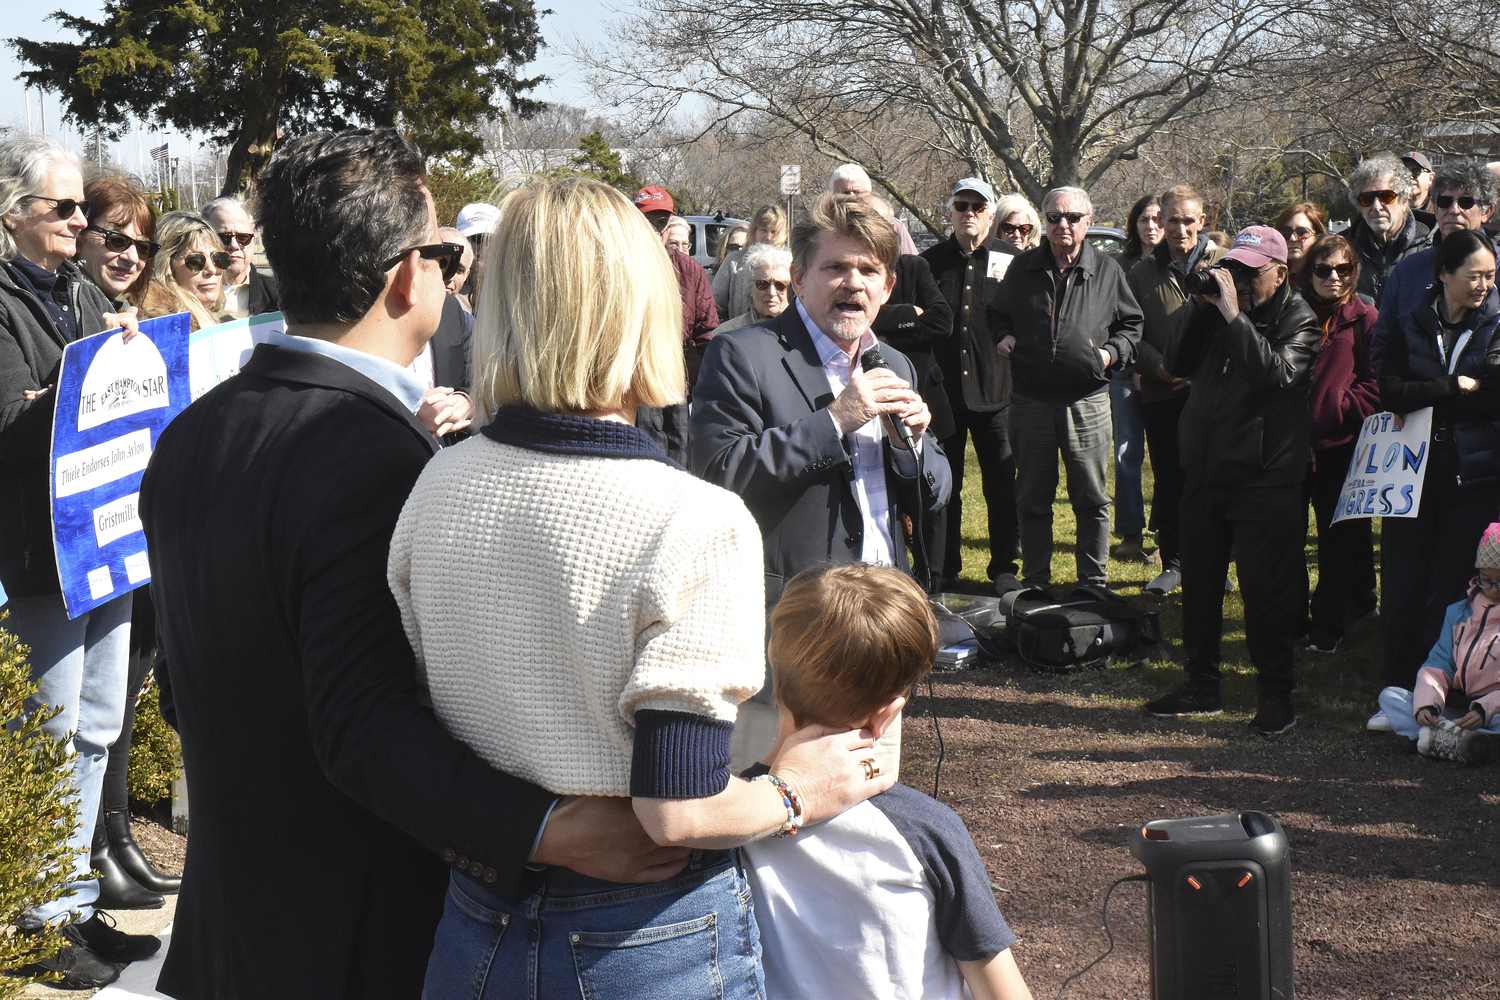 Southampton Town Councilman Tommy John Schiavoni, who is running for the State Assembly, speaks while congressional candidate John Avlon and his family look on at a rally in Sag Harbor in March. STEPHEN J. KOTZ